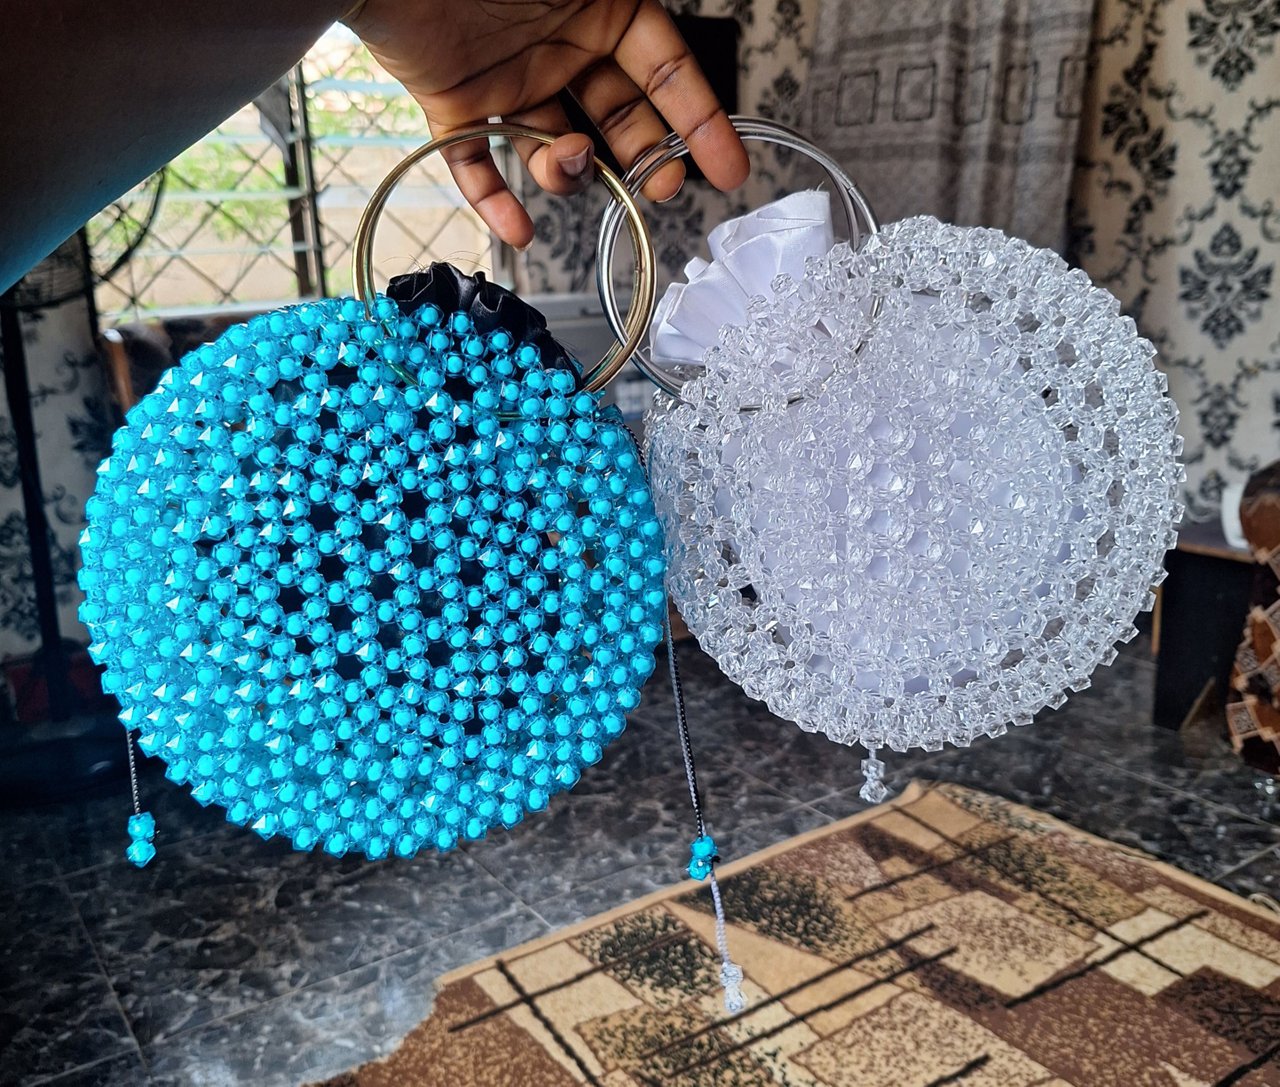 DIY// MAKING BEAUTIFUL BEADED ROUND BAGS WITH INNER POUCH.